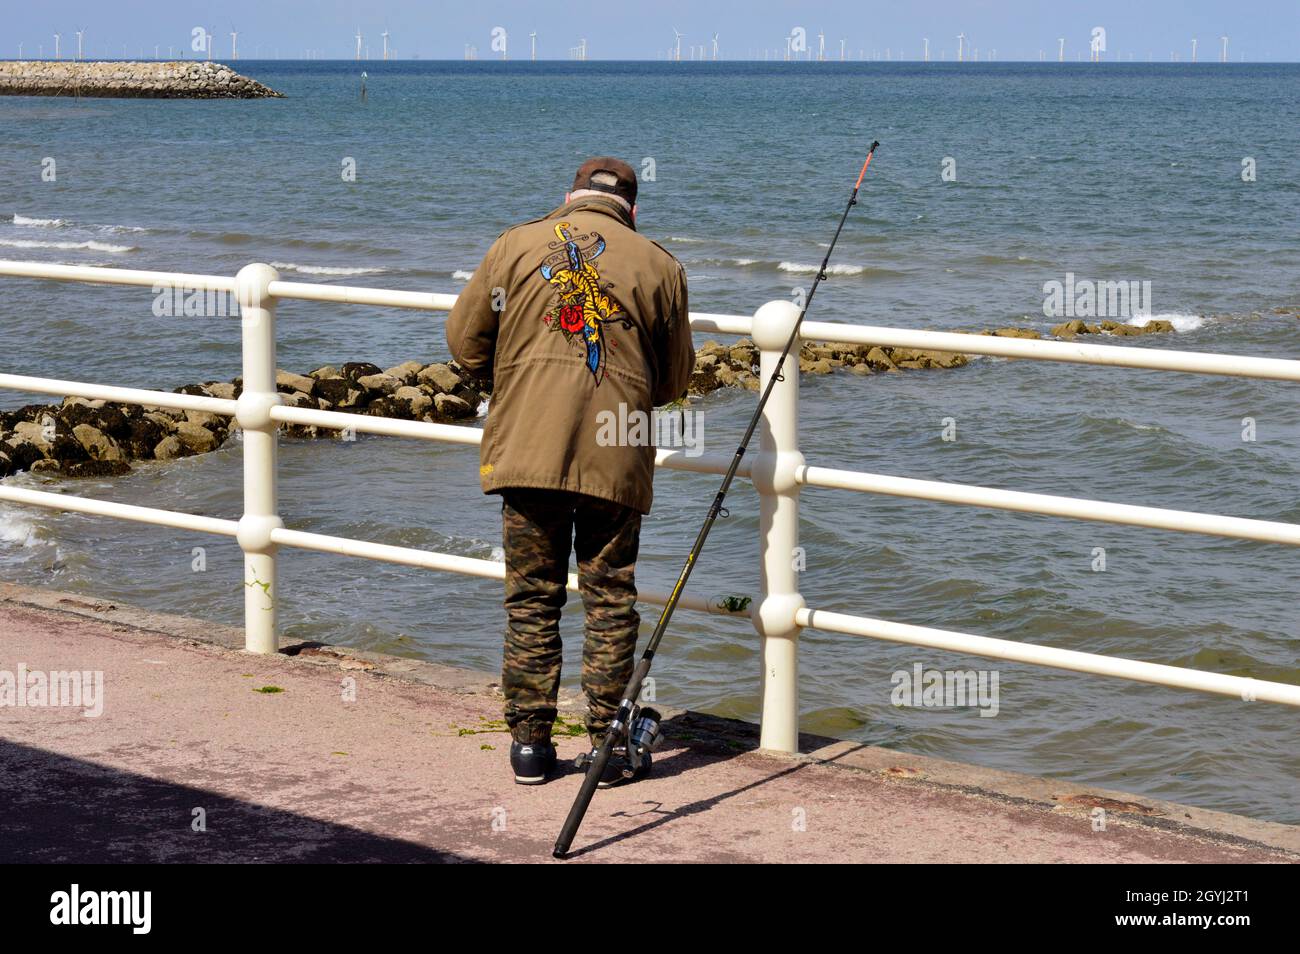 COLWYN BAY. CONWY COUNTY. WALES. 06-19-21. Rhos on Sea, a sea angler fishing from the promenade. Stock Photo